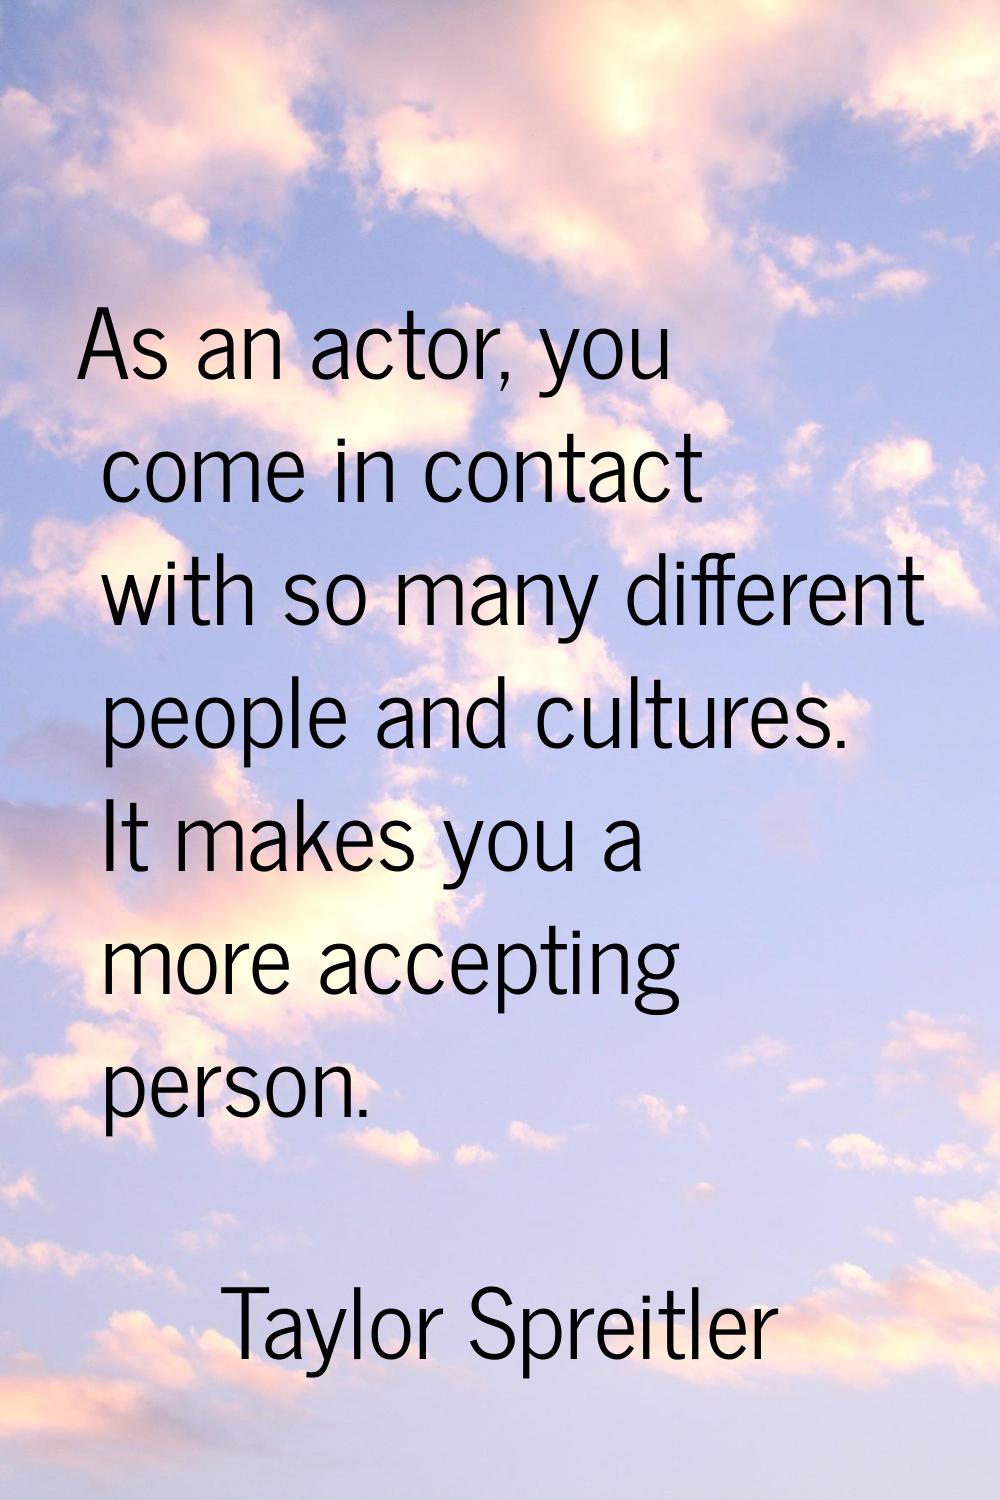 As an actor, you come in contact with so many different people and cultures. It makes you a more ac